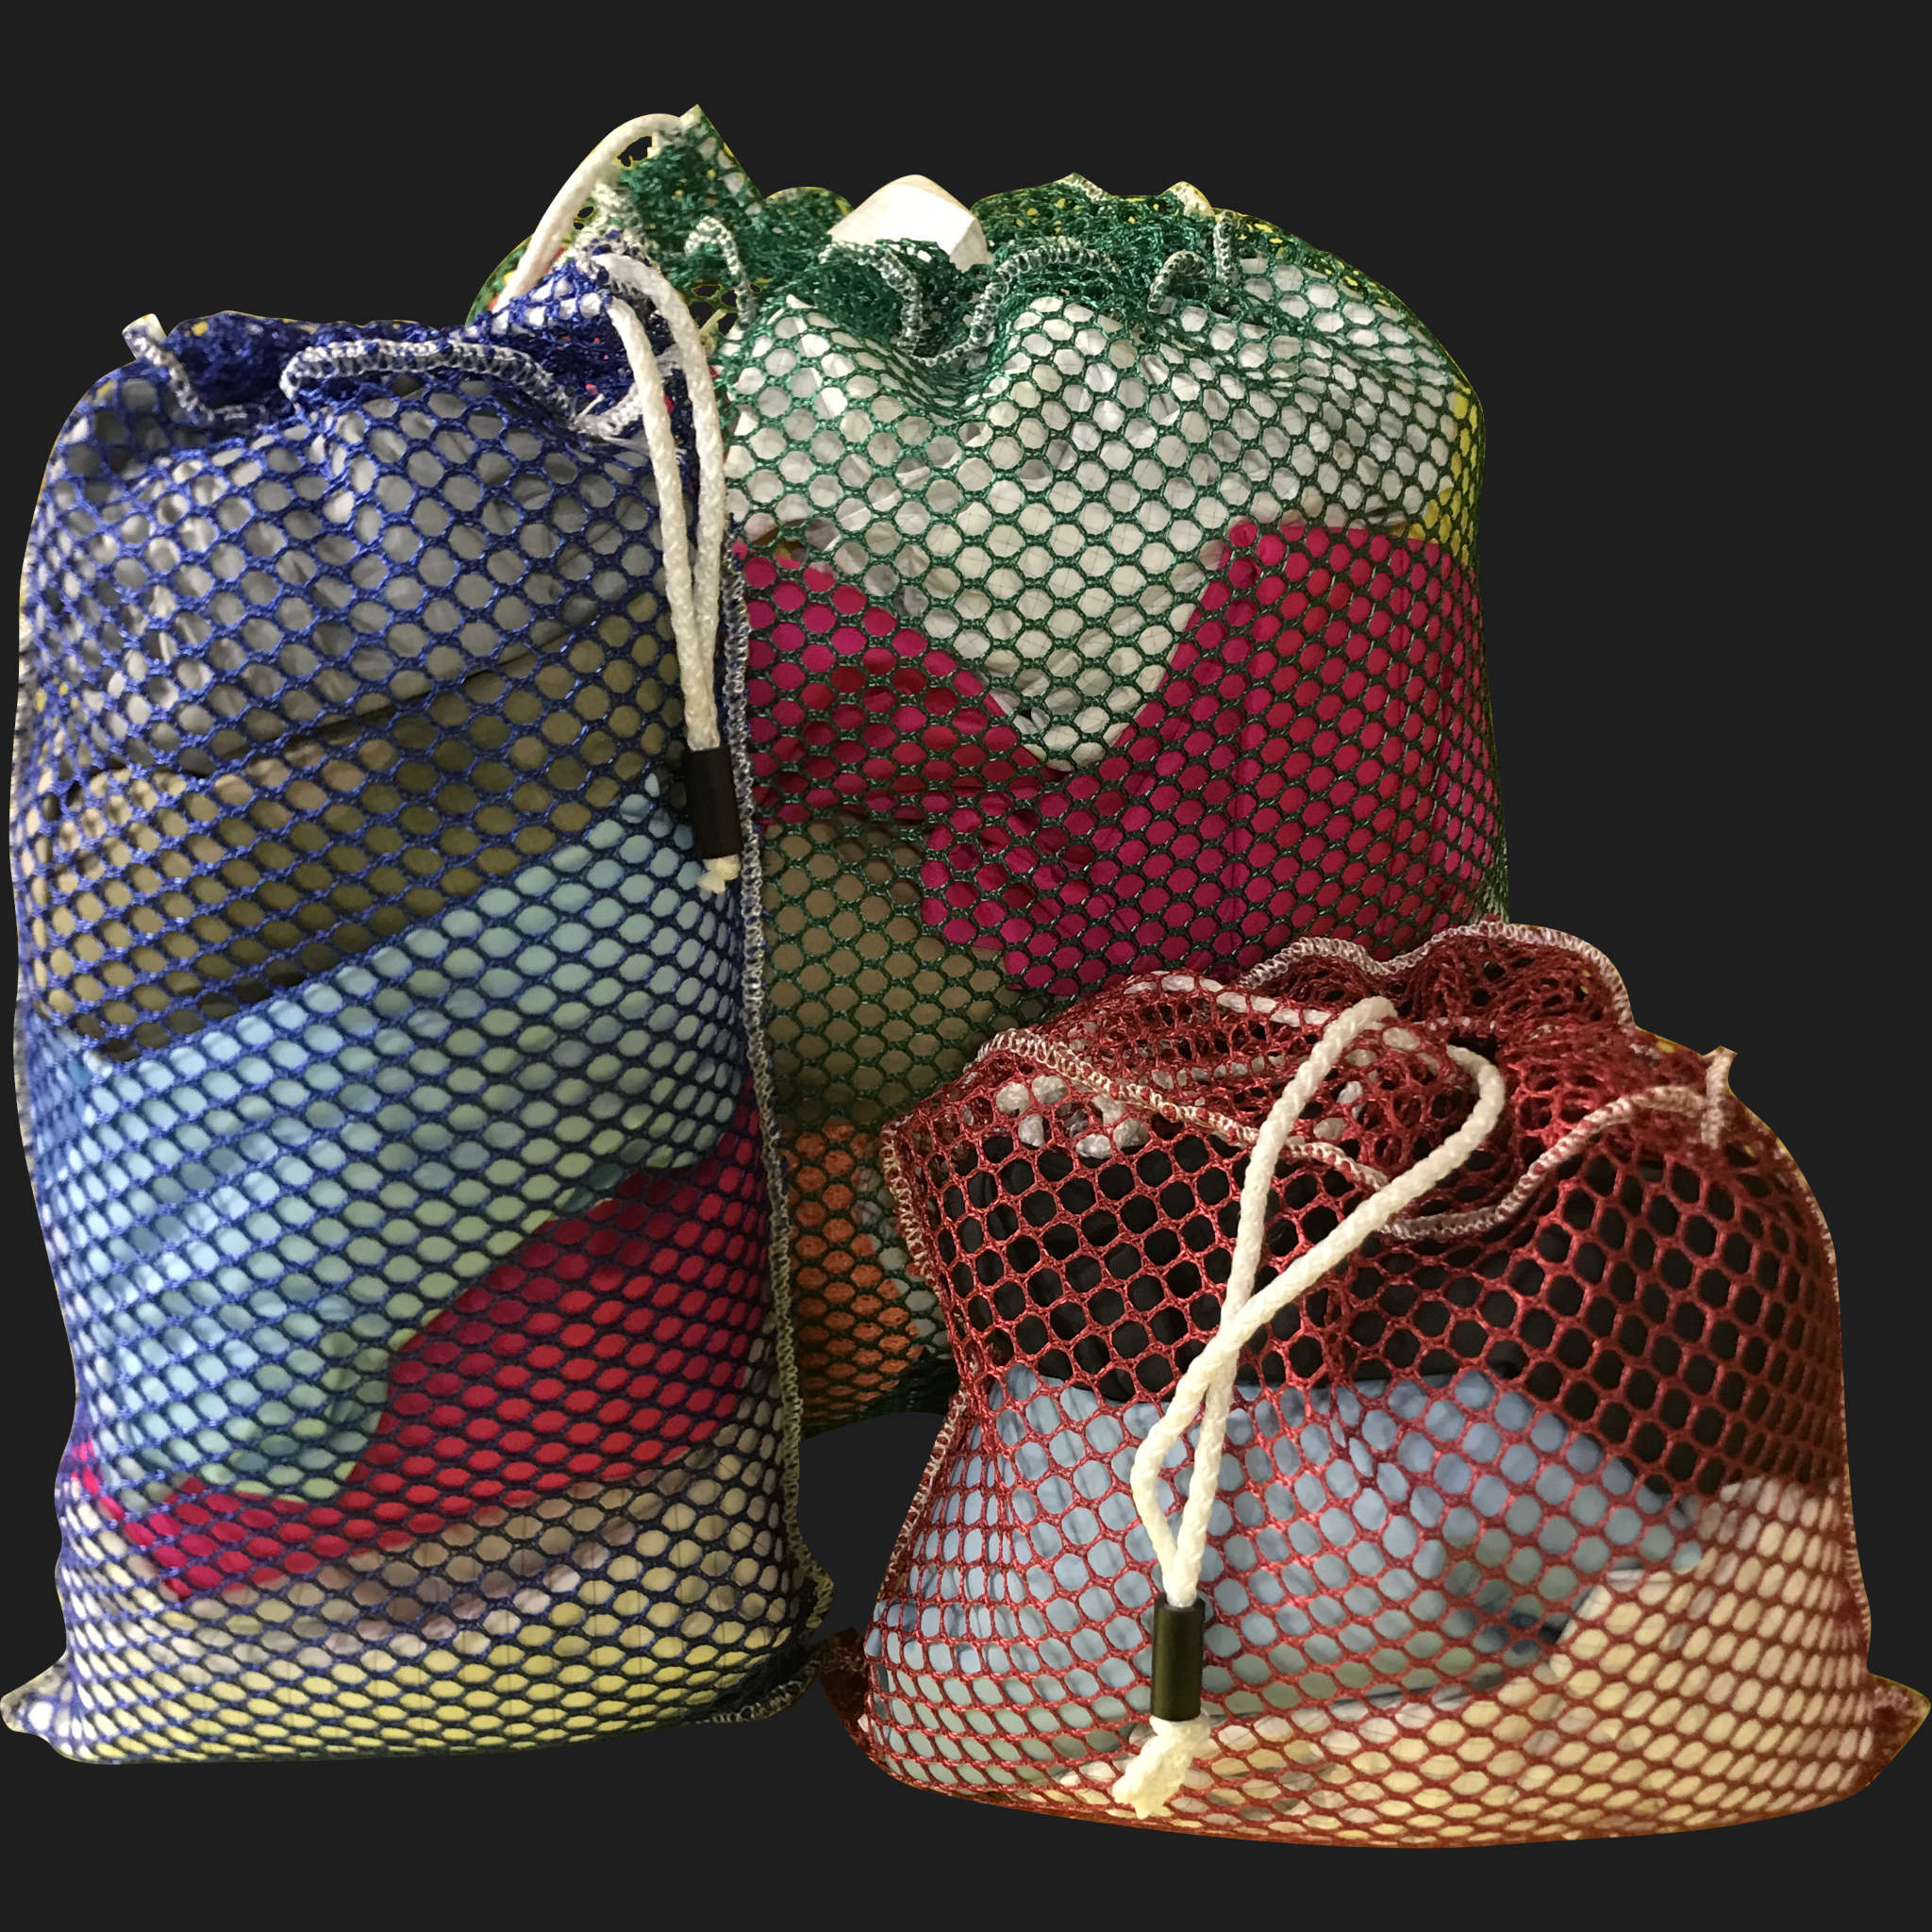 14" x 22" Customized Mesh-Net-Laundry Bags Heavy Duty with Cord and barrellock closure